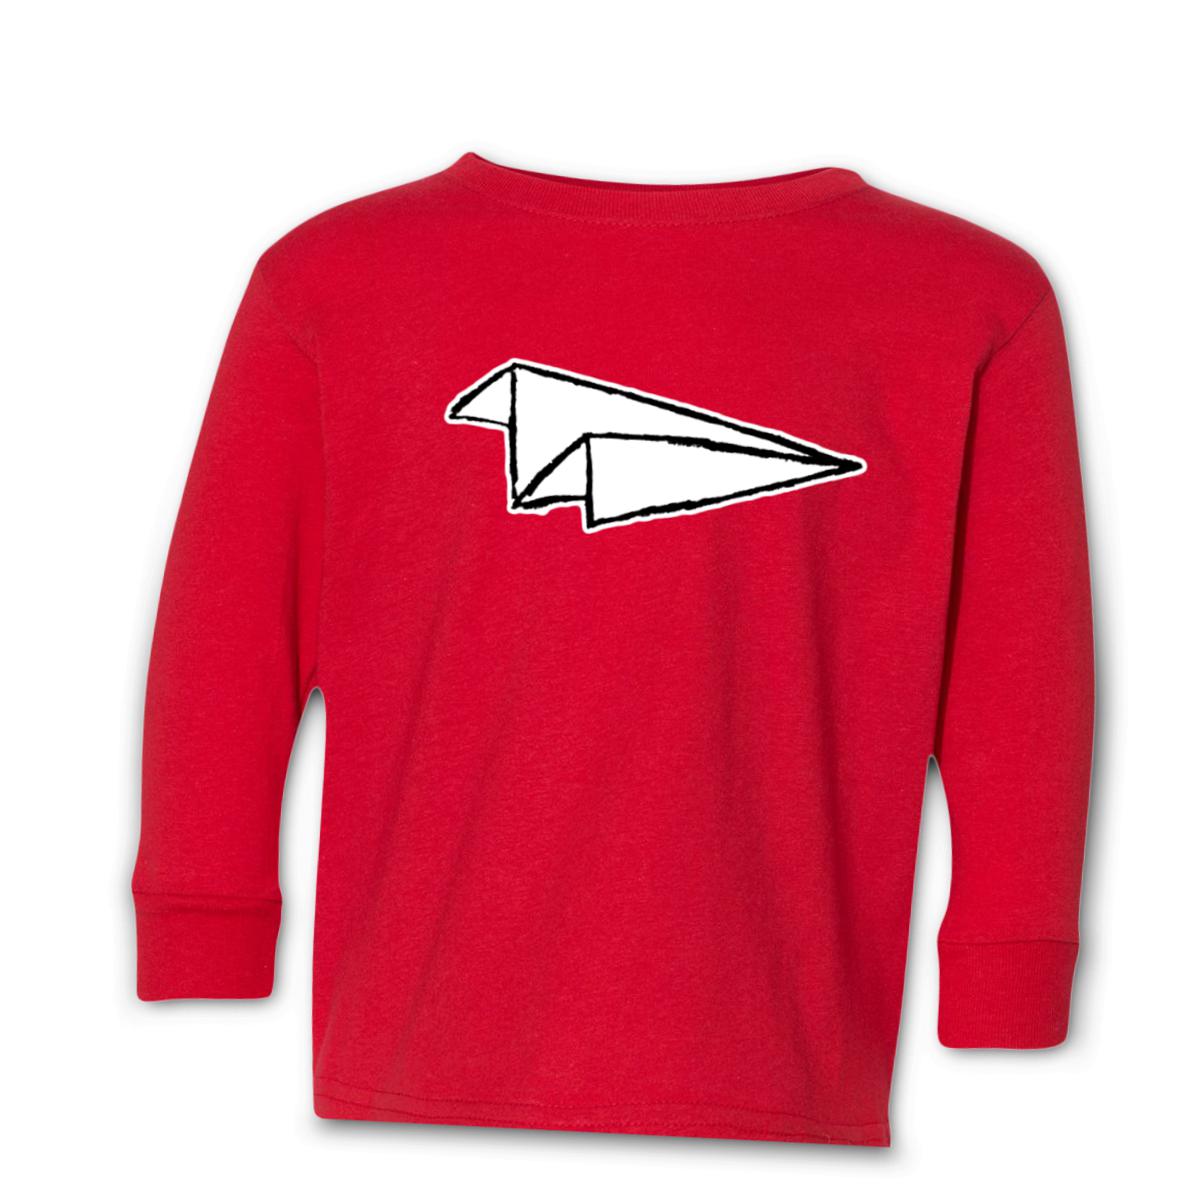 Airplane Sketch Toddler Long Sleeve Tee 56T red